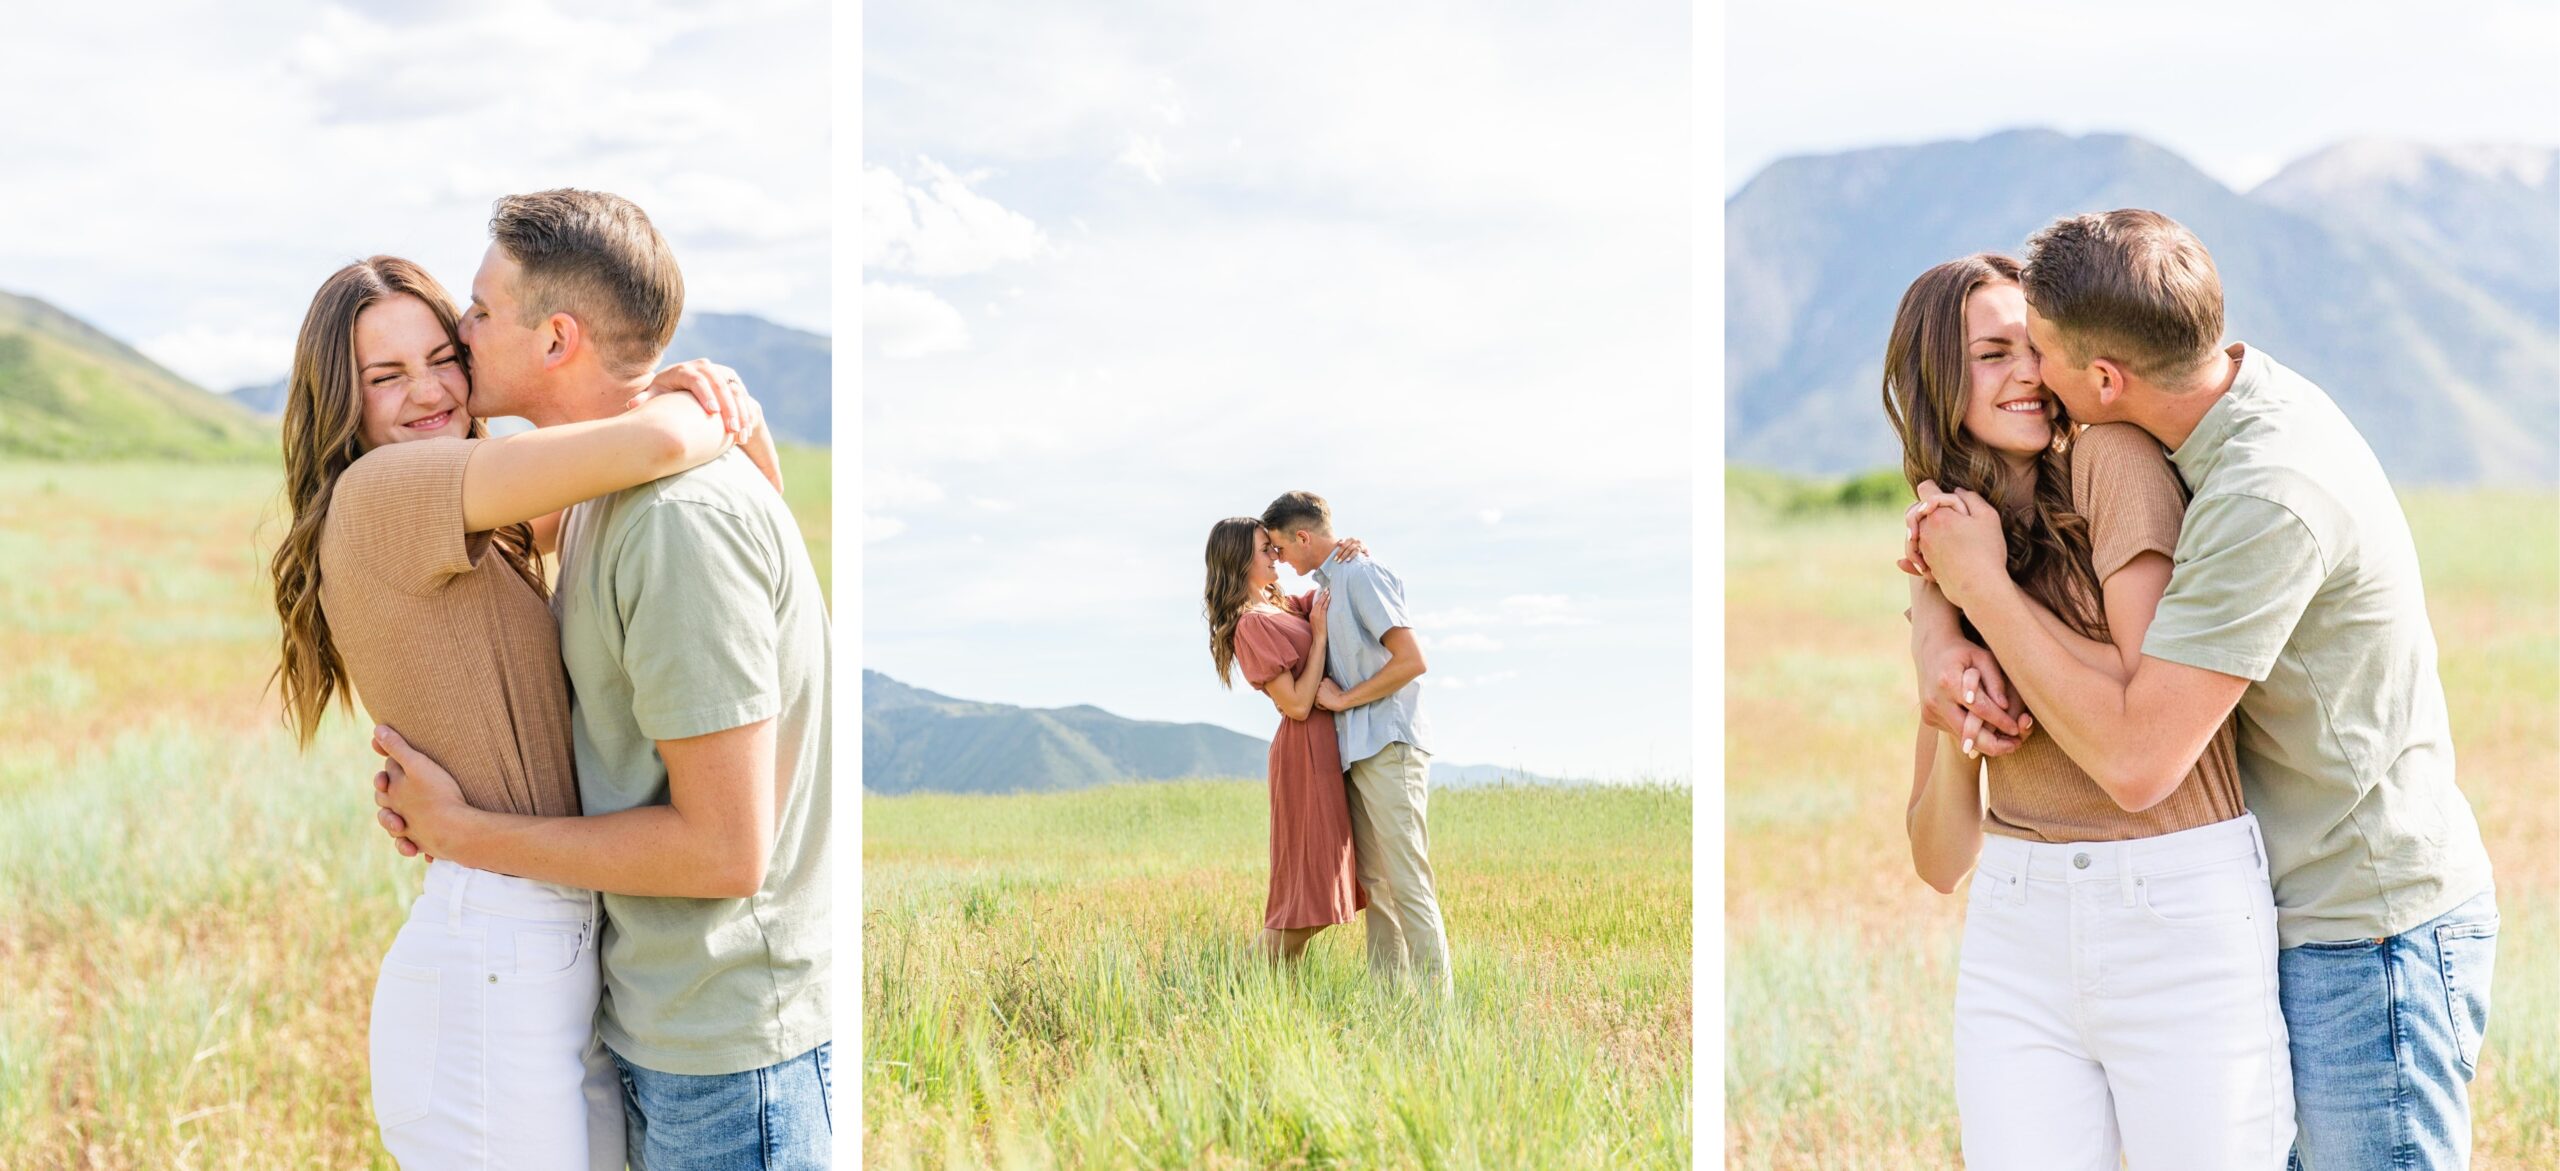 engagement photos in a field 